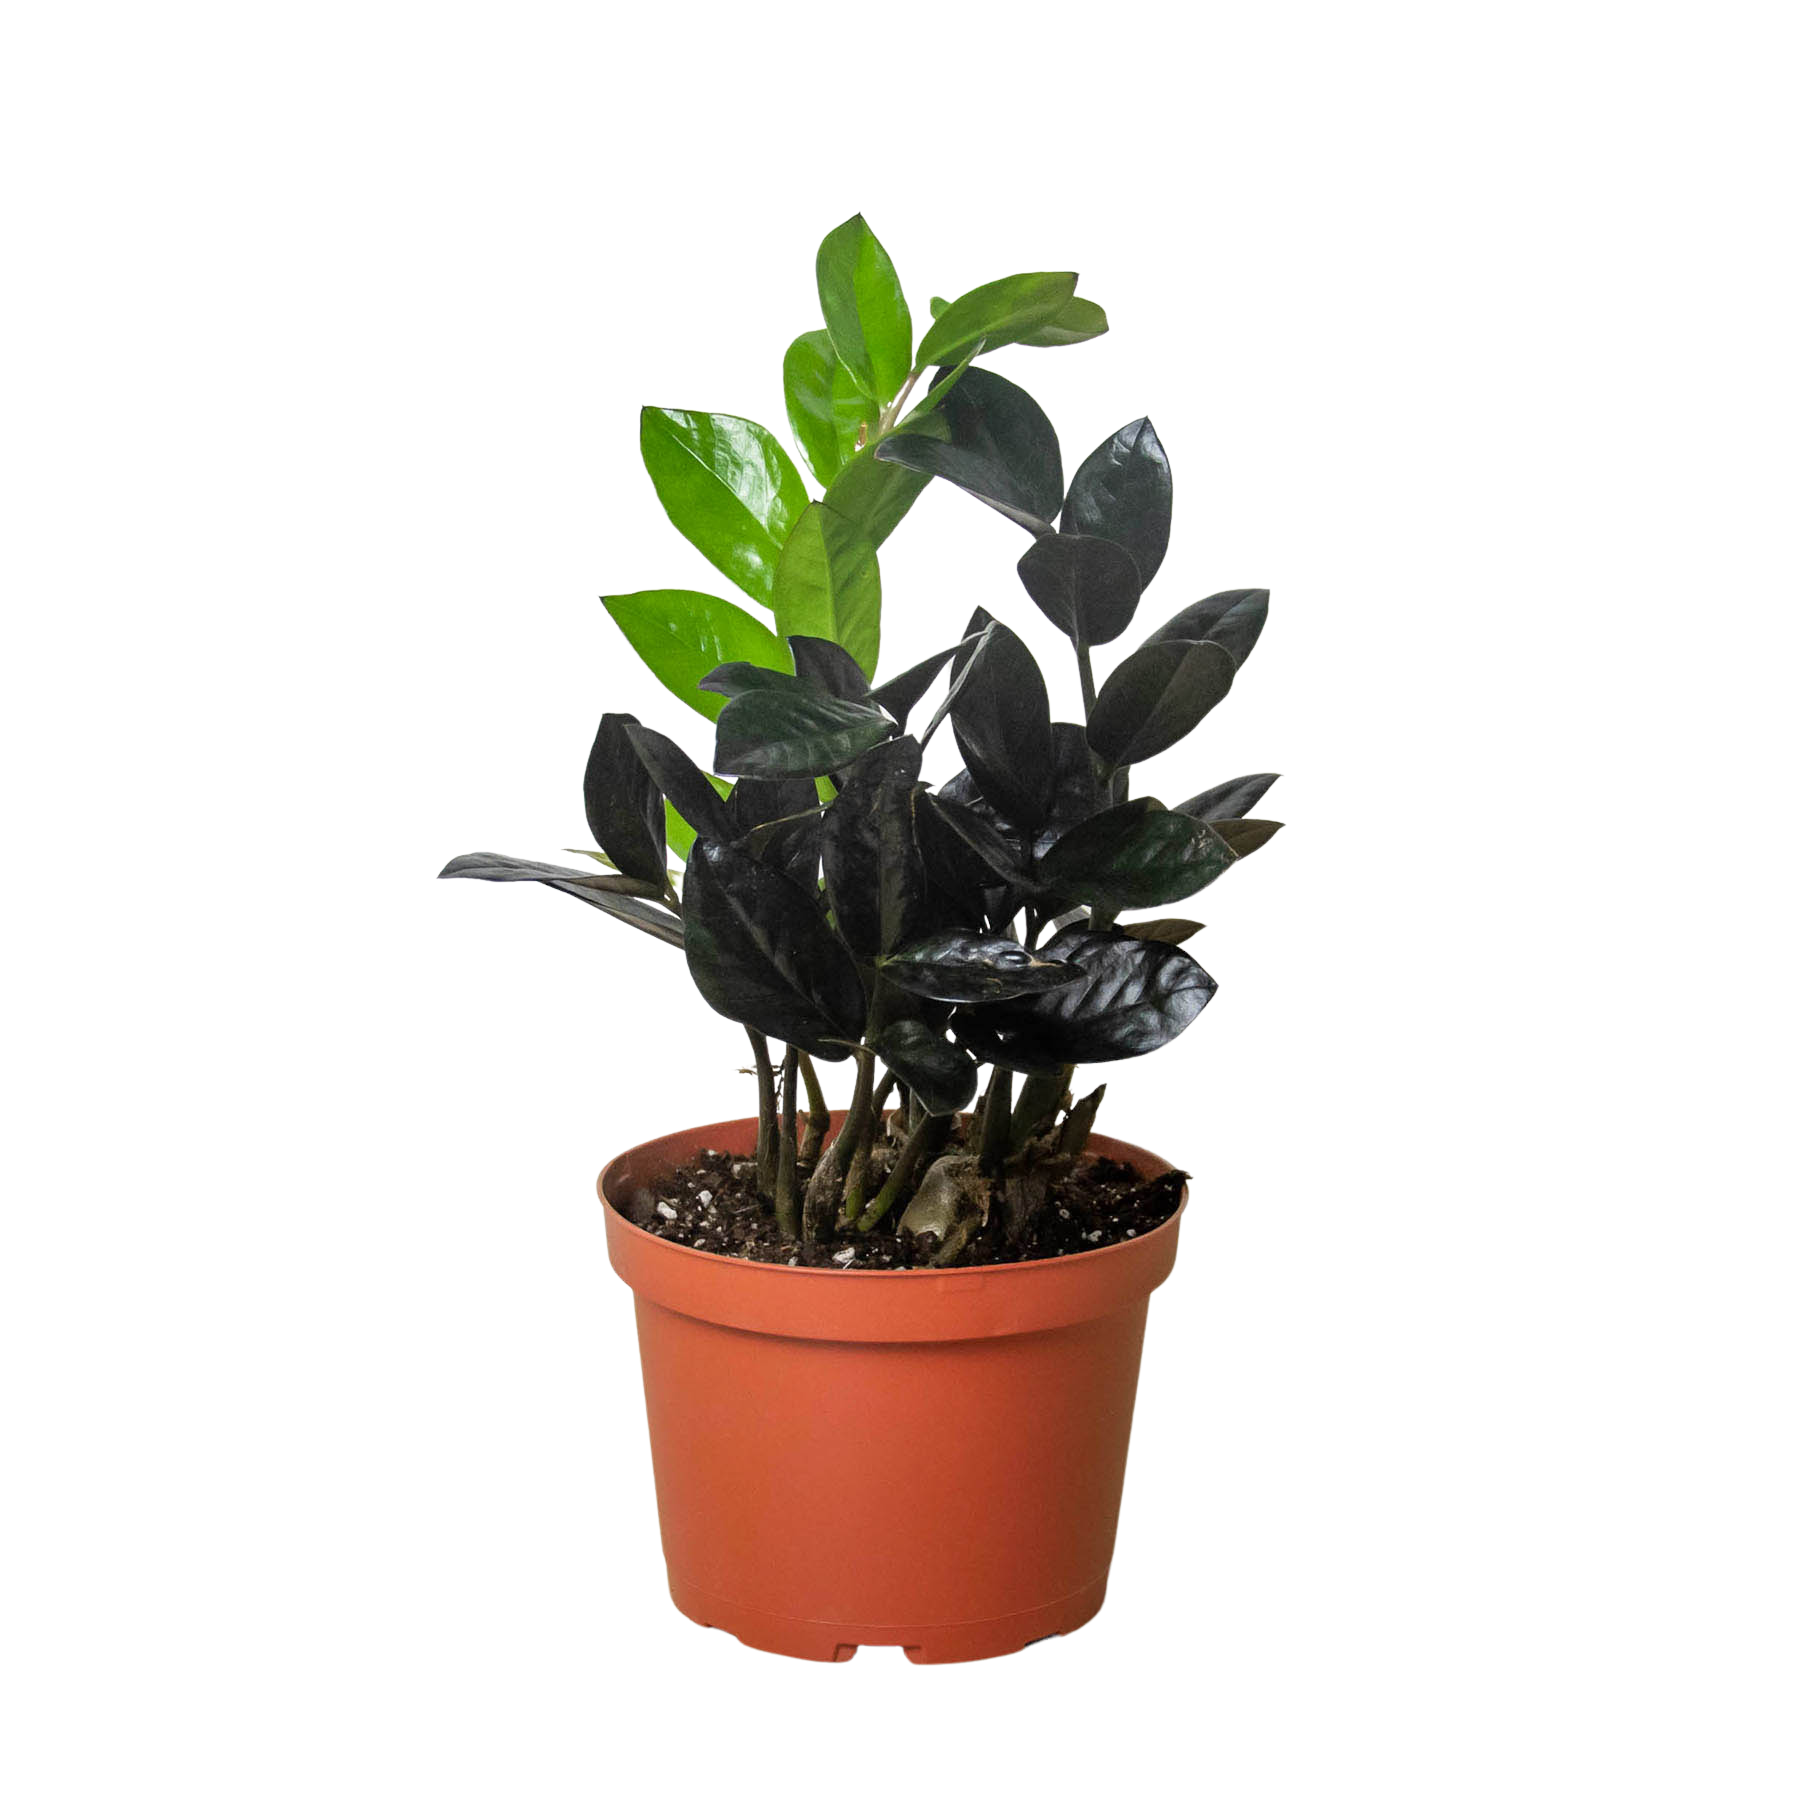 A black plant in a pot on a white background from the best plant nursery near me.